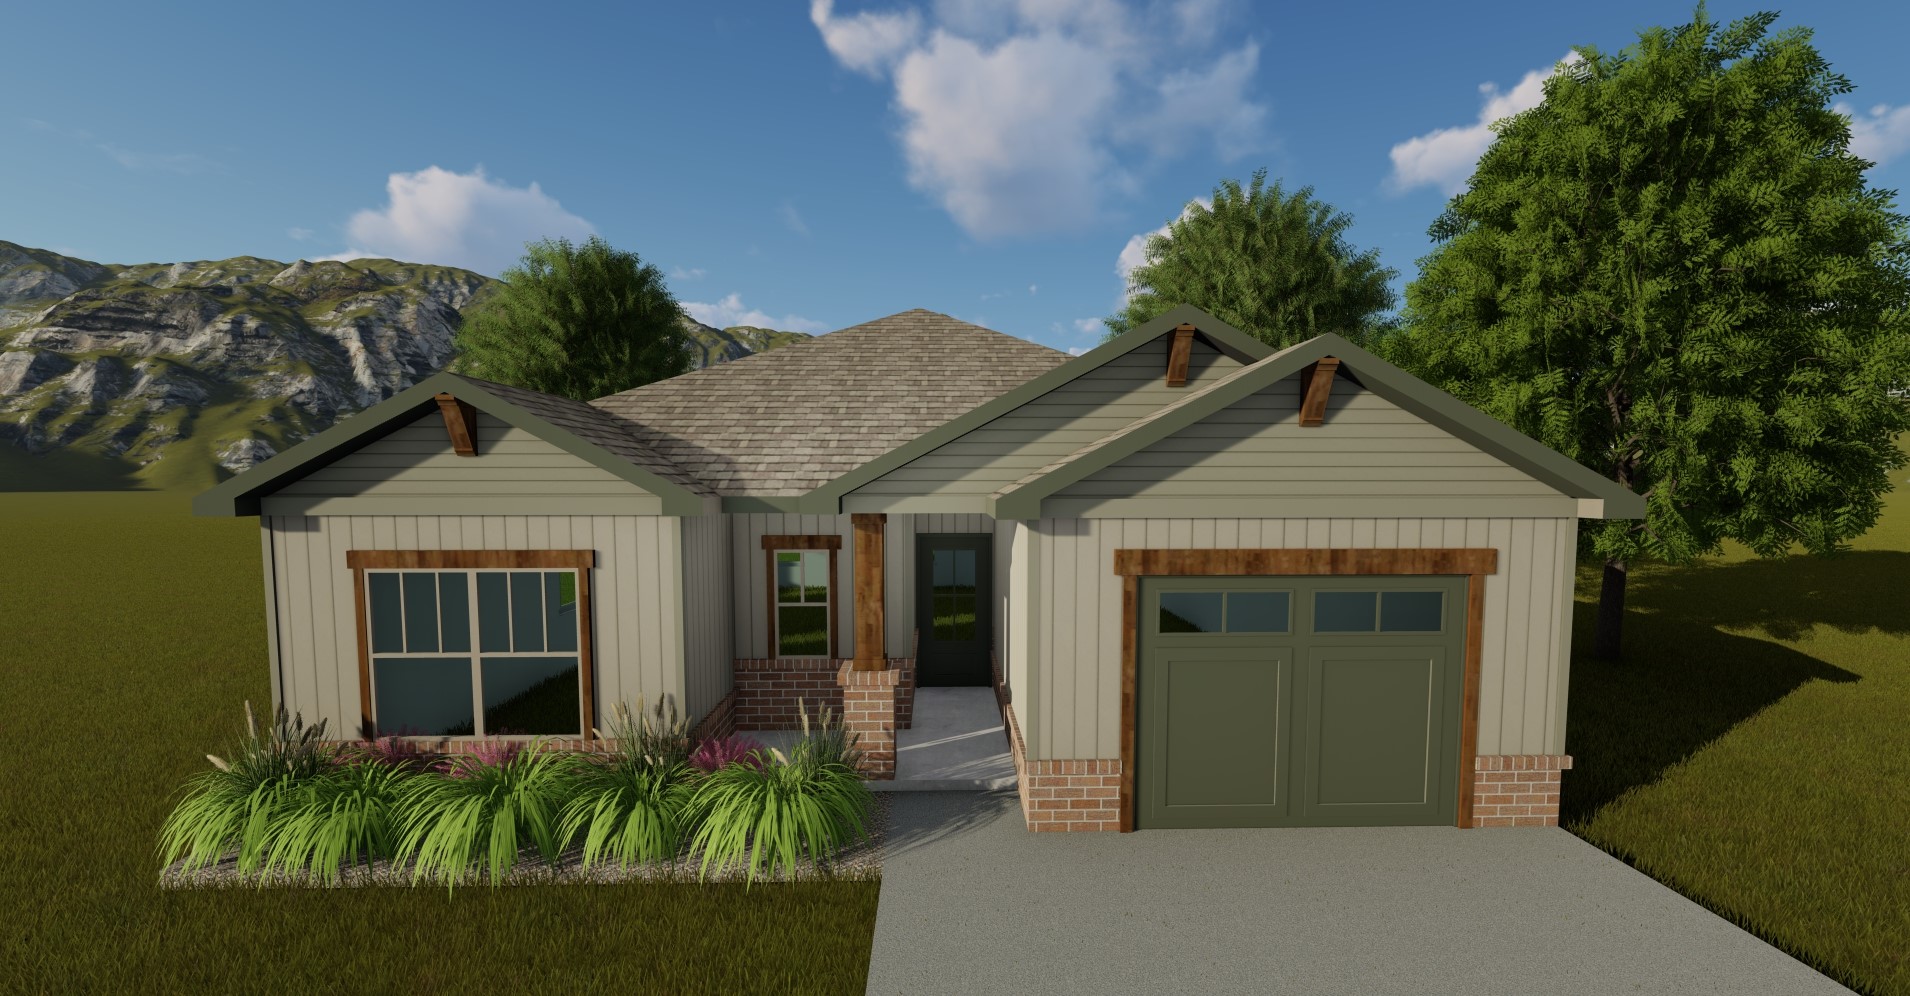 A rendering of a house planned for Fairview, Oklahoma. (Courtesy photo.)